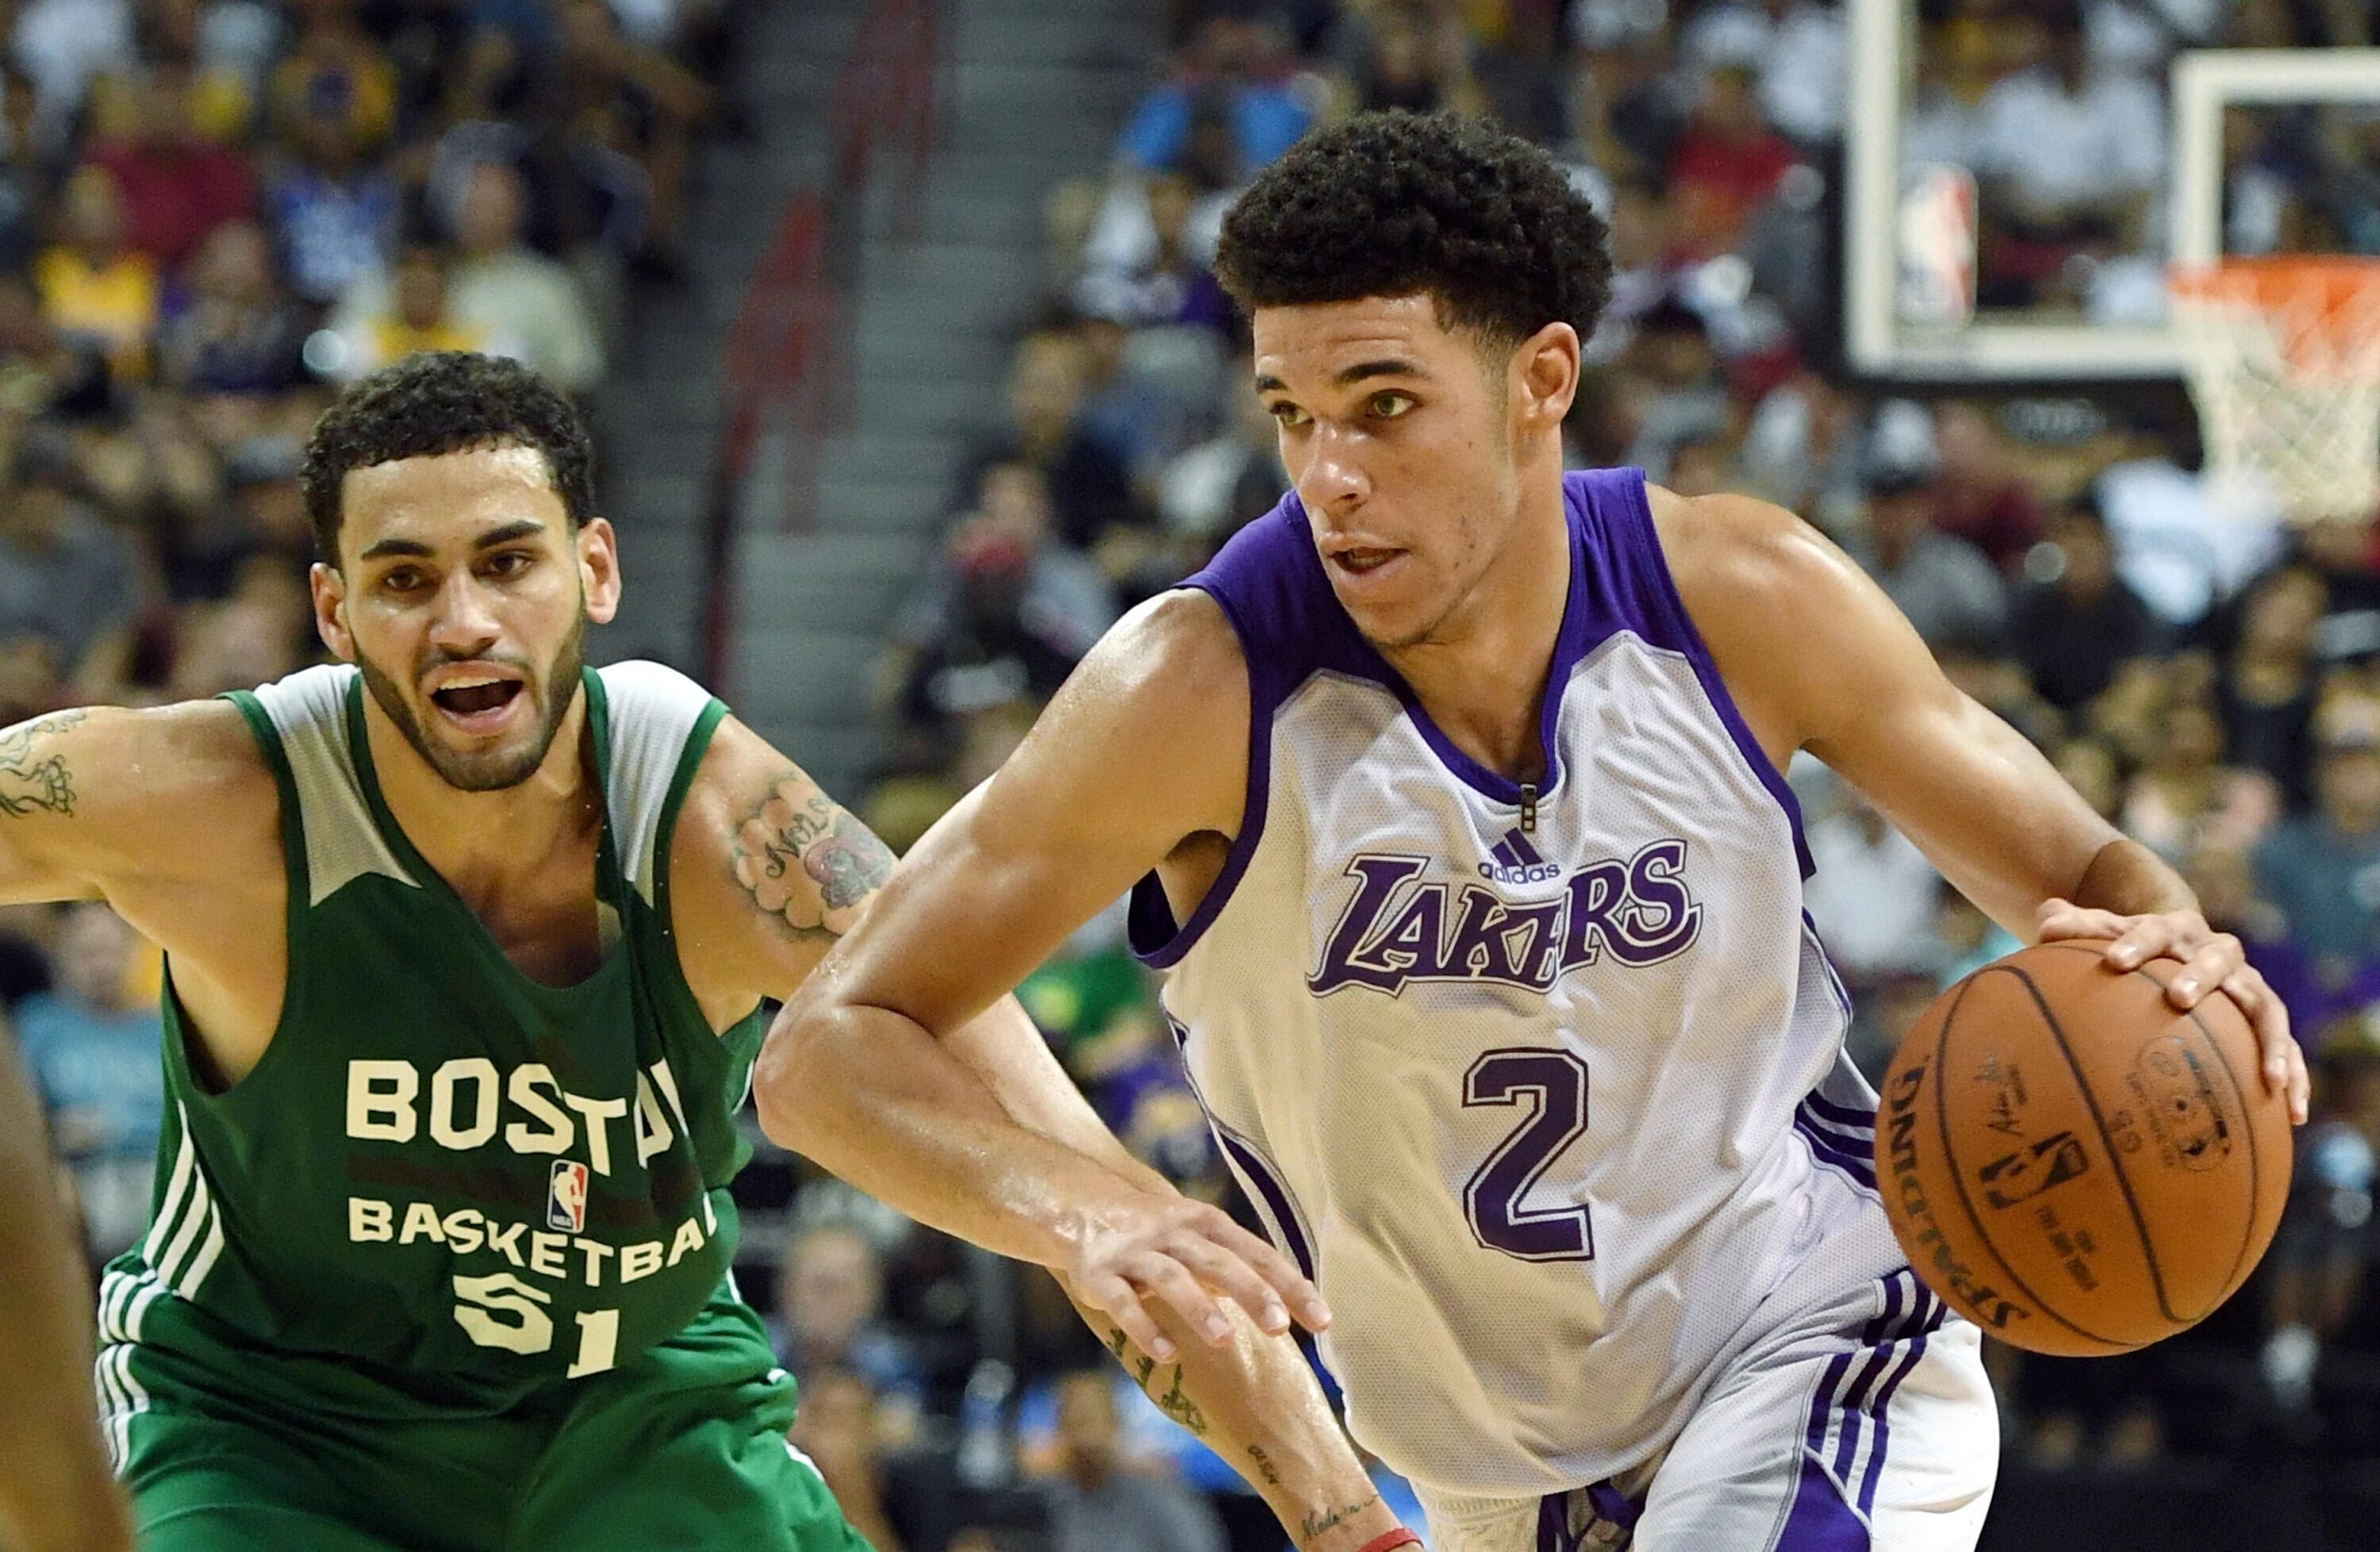 LAS VEGAS, NV - JULY 08:  Lonzo Ball #2 of the Los Angeles Lakers drives against Abdel Nader #51 of the Boston Celtics during the 2017 Summer League at the Thomas & Mack Center on July 8, 2017 in Las Vegas, Nevada. Boston won 86-81. NOTE TO USER: User exp